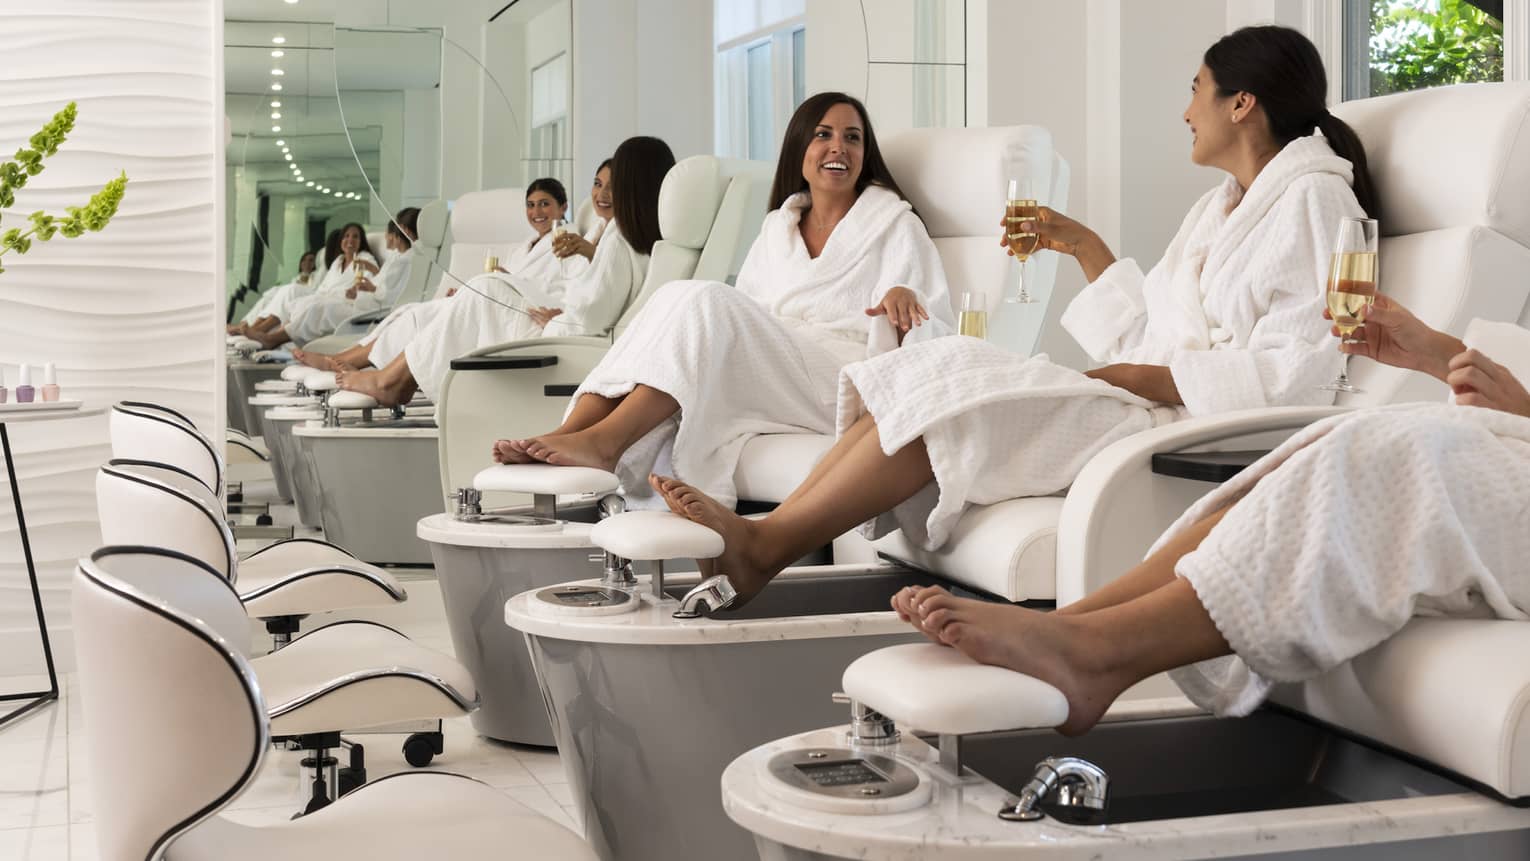 Three women wearing bath robes sit in pedicure spa chairs